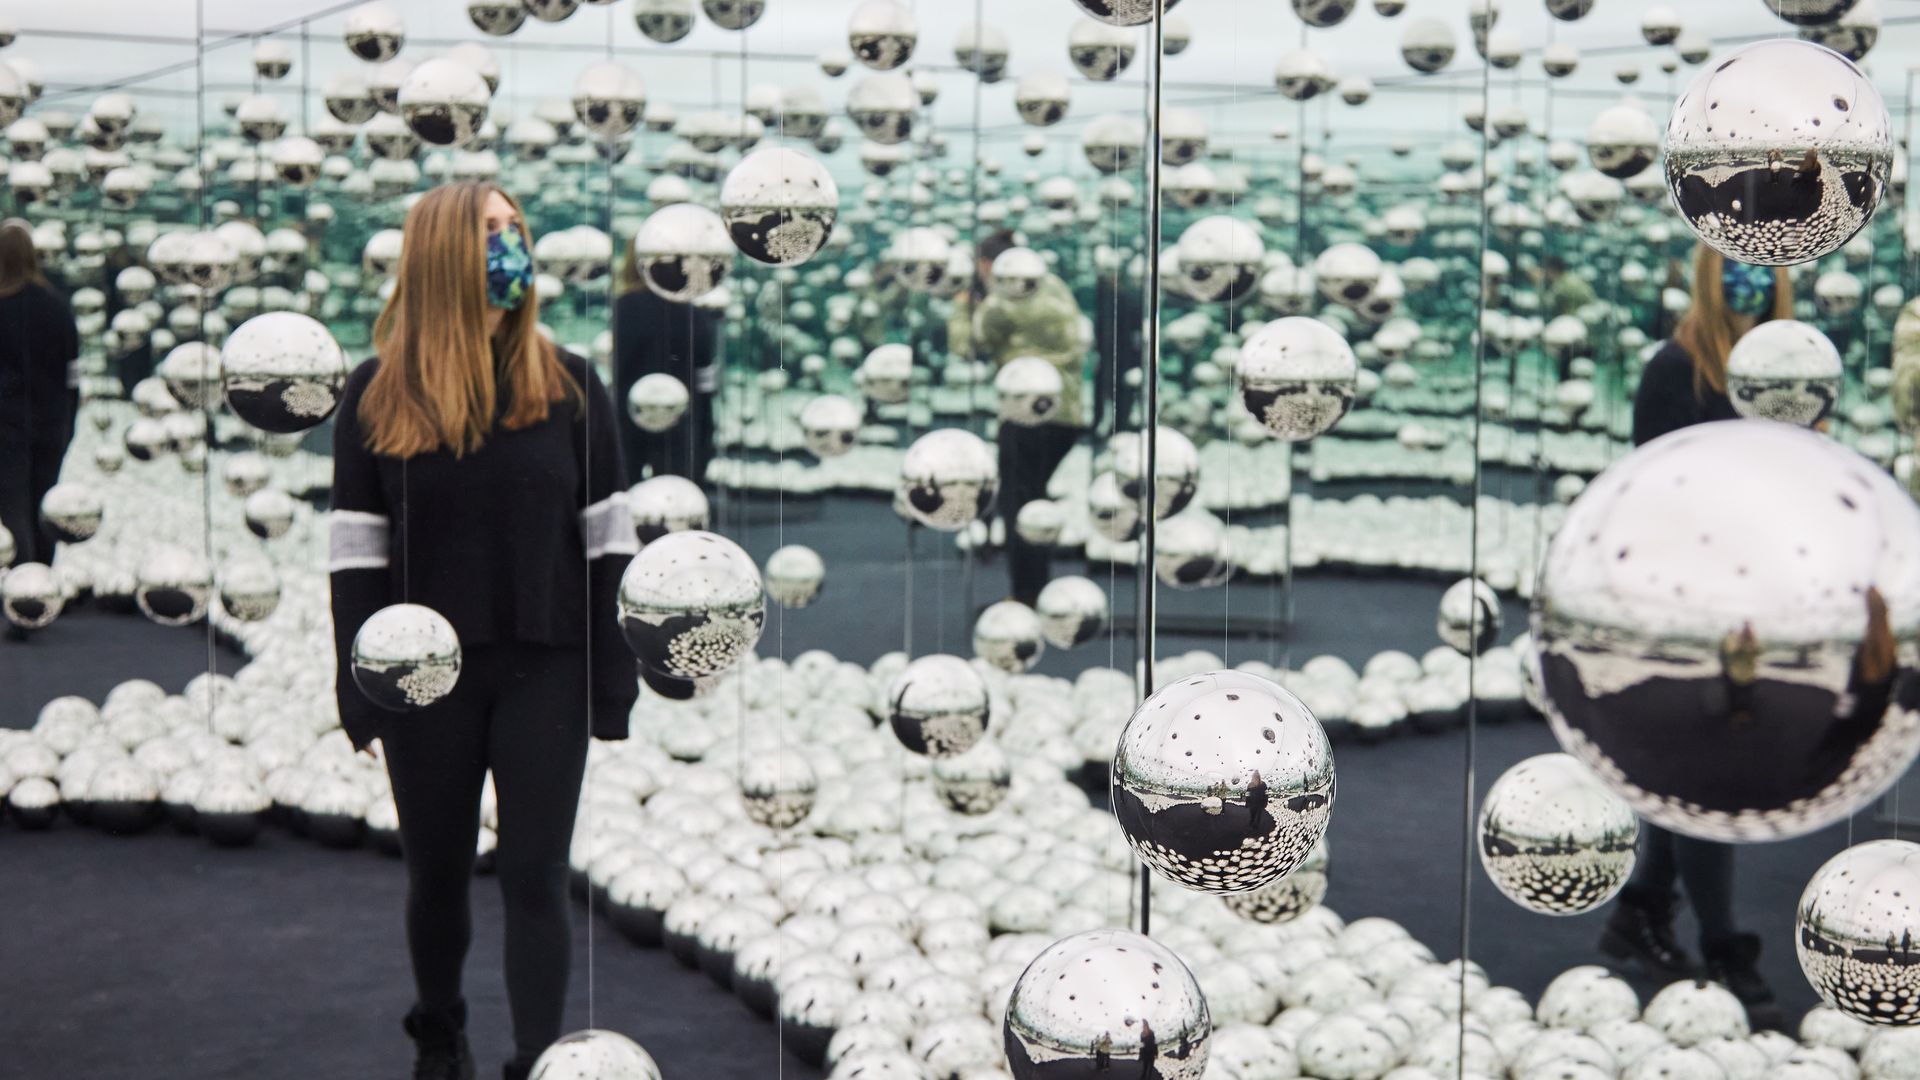 A visitor to the WNDR Museum in Chicago immerses herself in an art exhibit of mirrors.